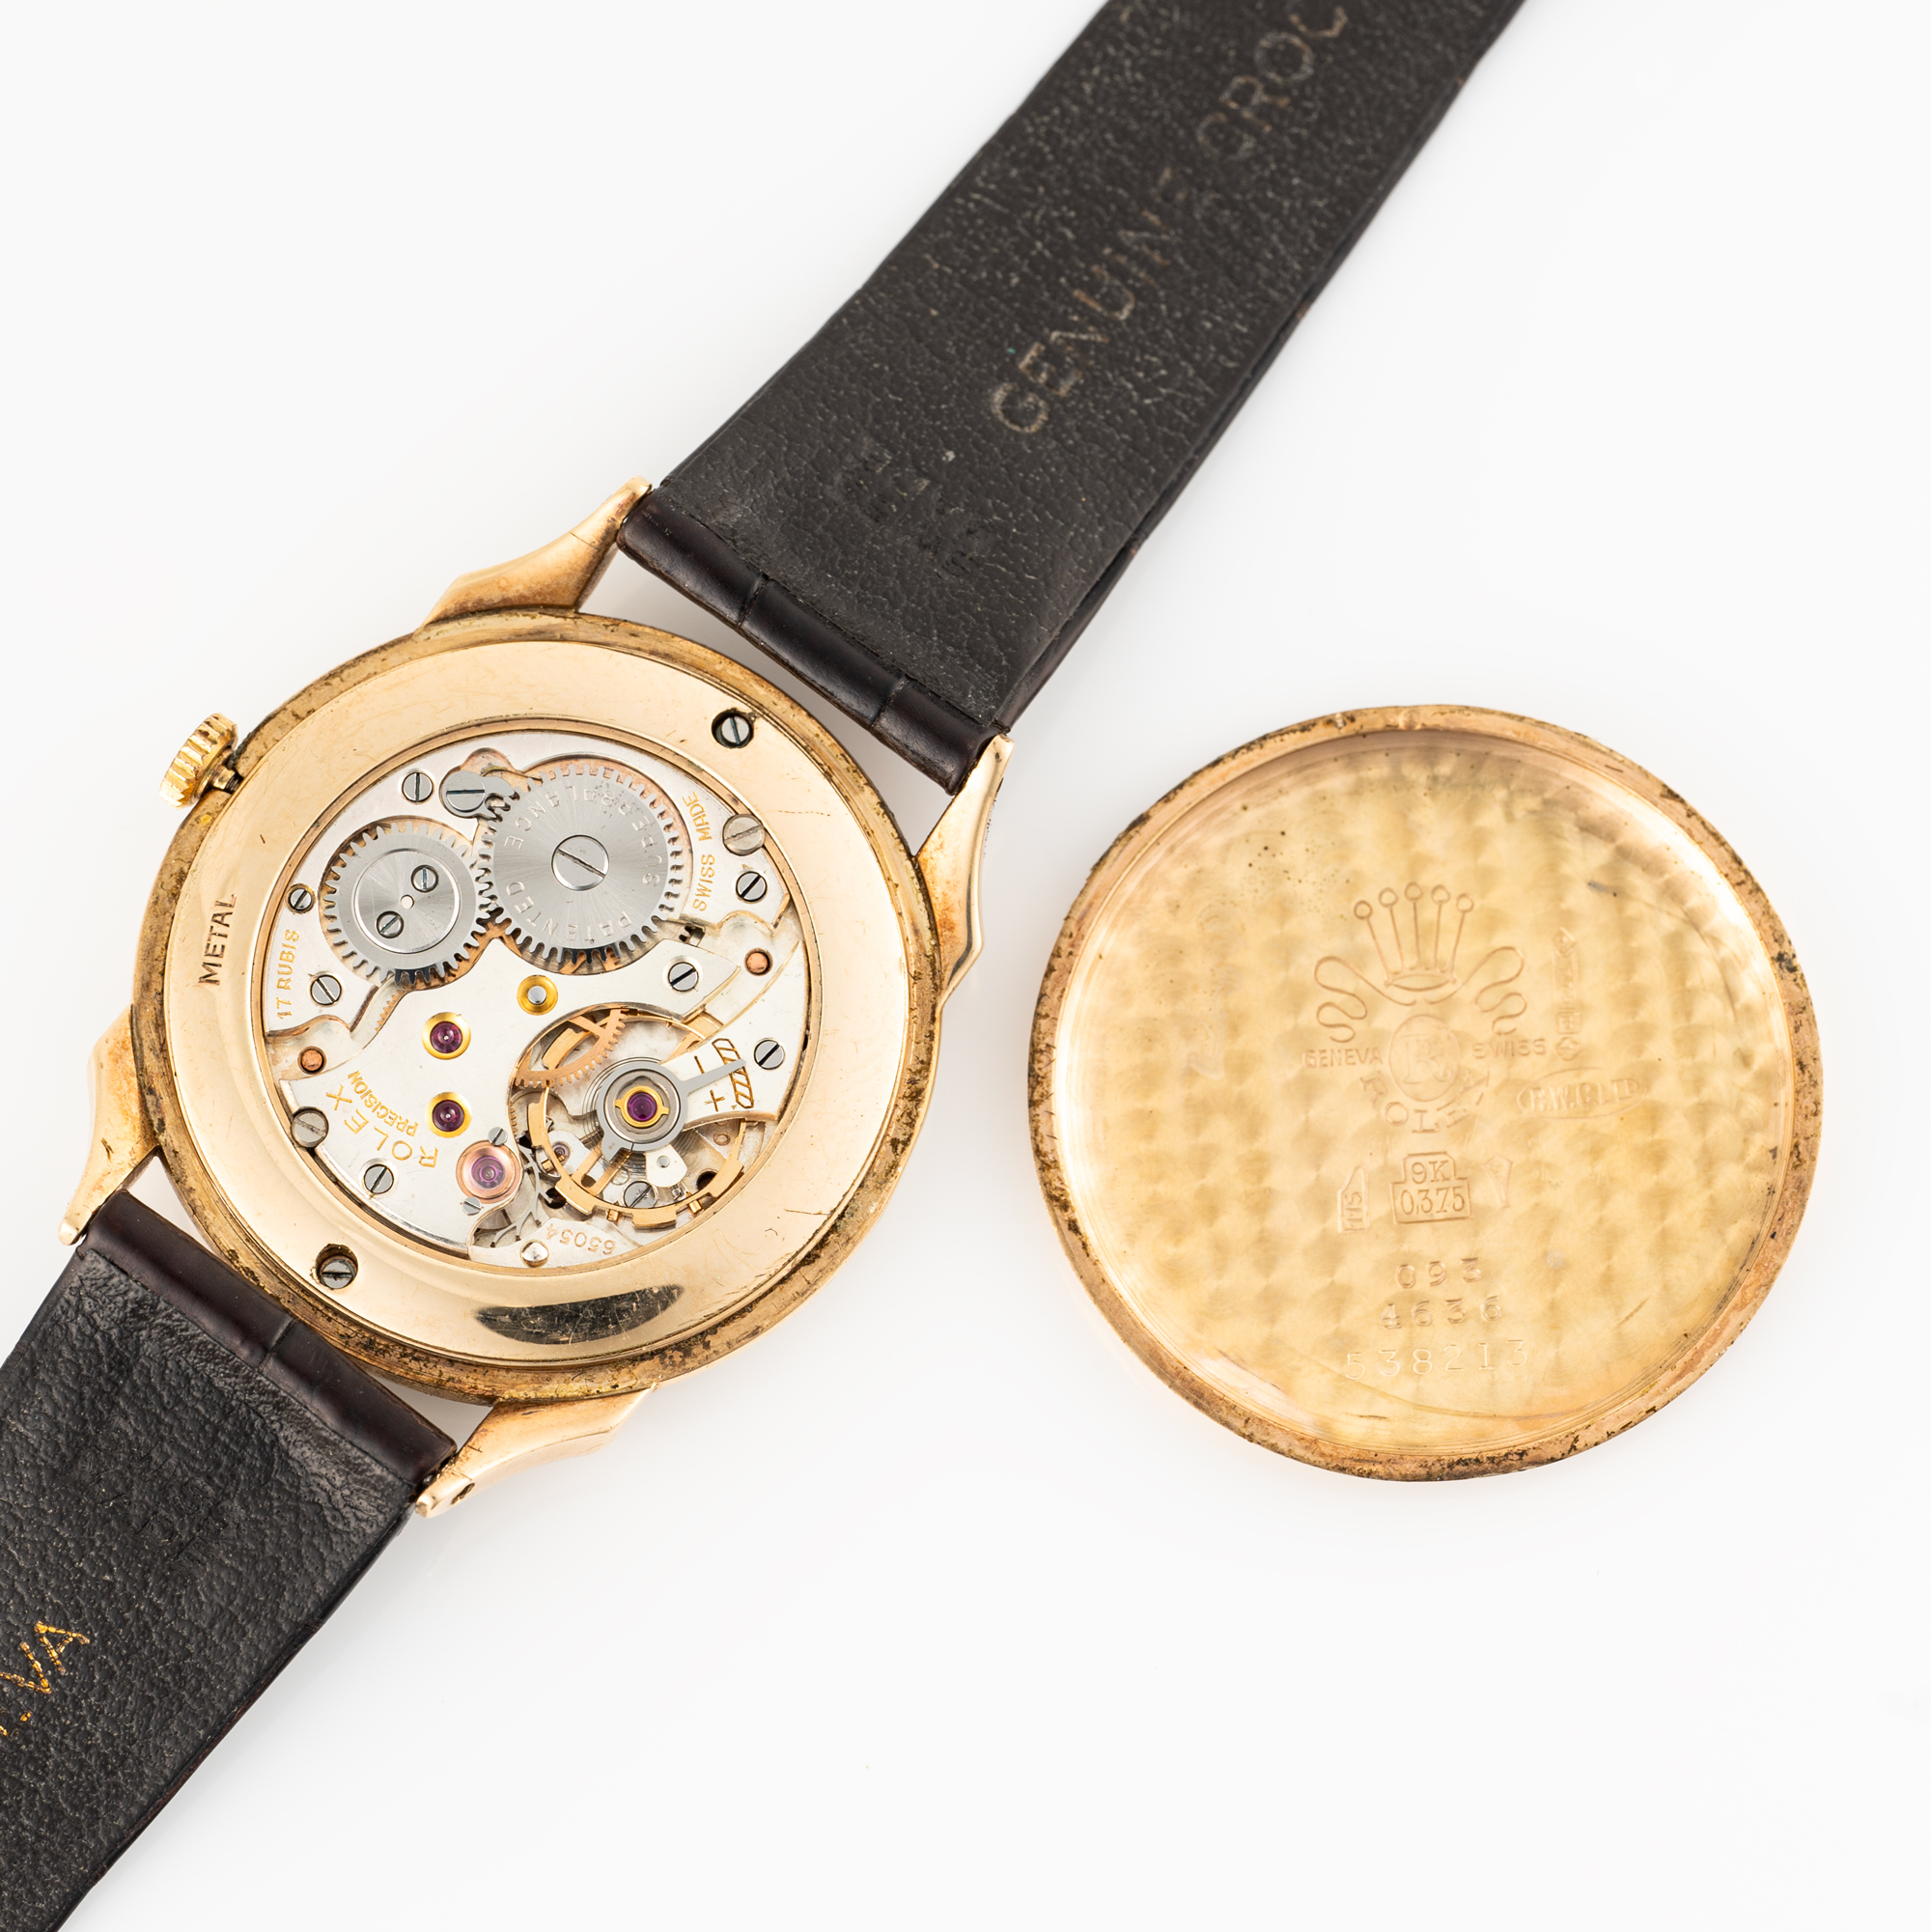 A RARE GENTLEMAN'S SIZE 9CT SOLID GOLD ROLEX PRECISION WRIST WATCH CIRCA 1950s, WITH SCALLOPED - Image 8 of 9